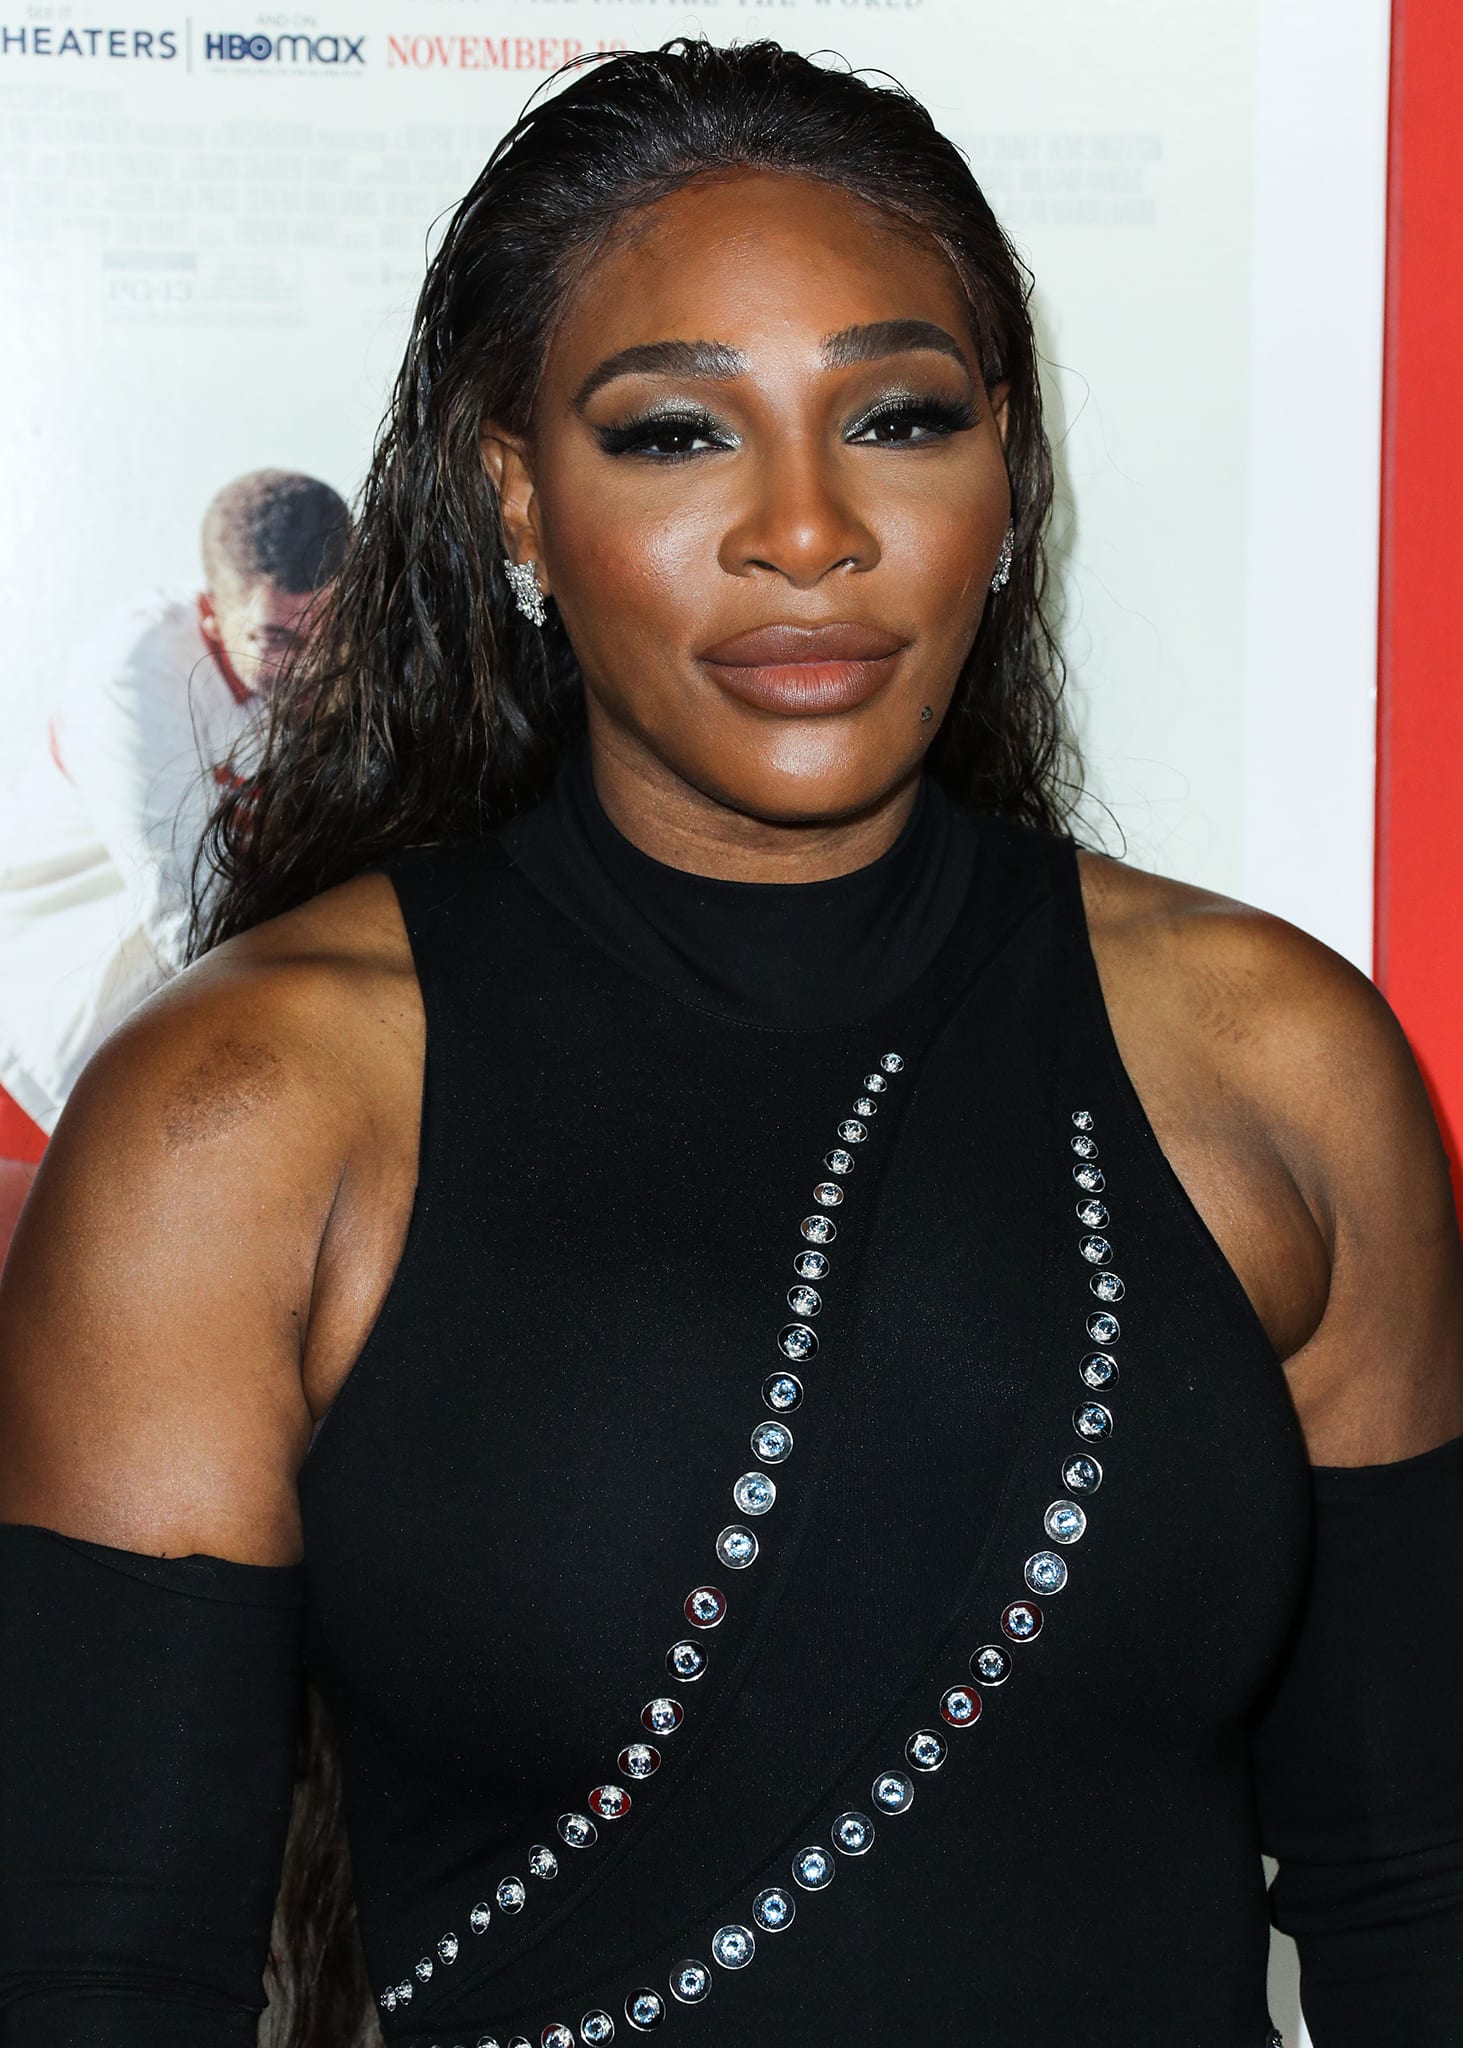 Serena Williams opts for a sultry wet look hairstyle with smokey eyes and nude lipstick